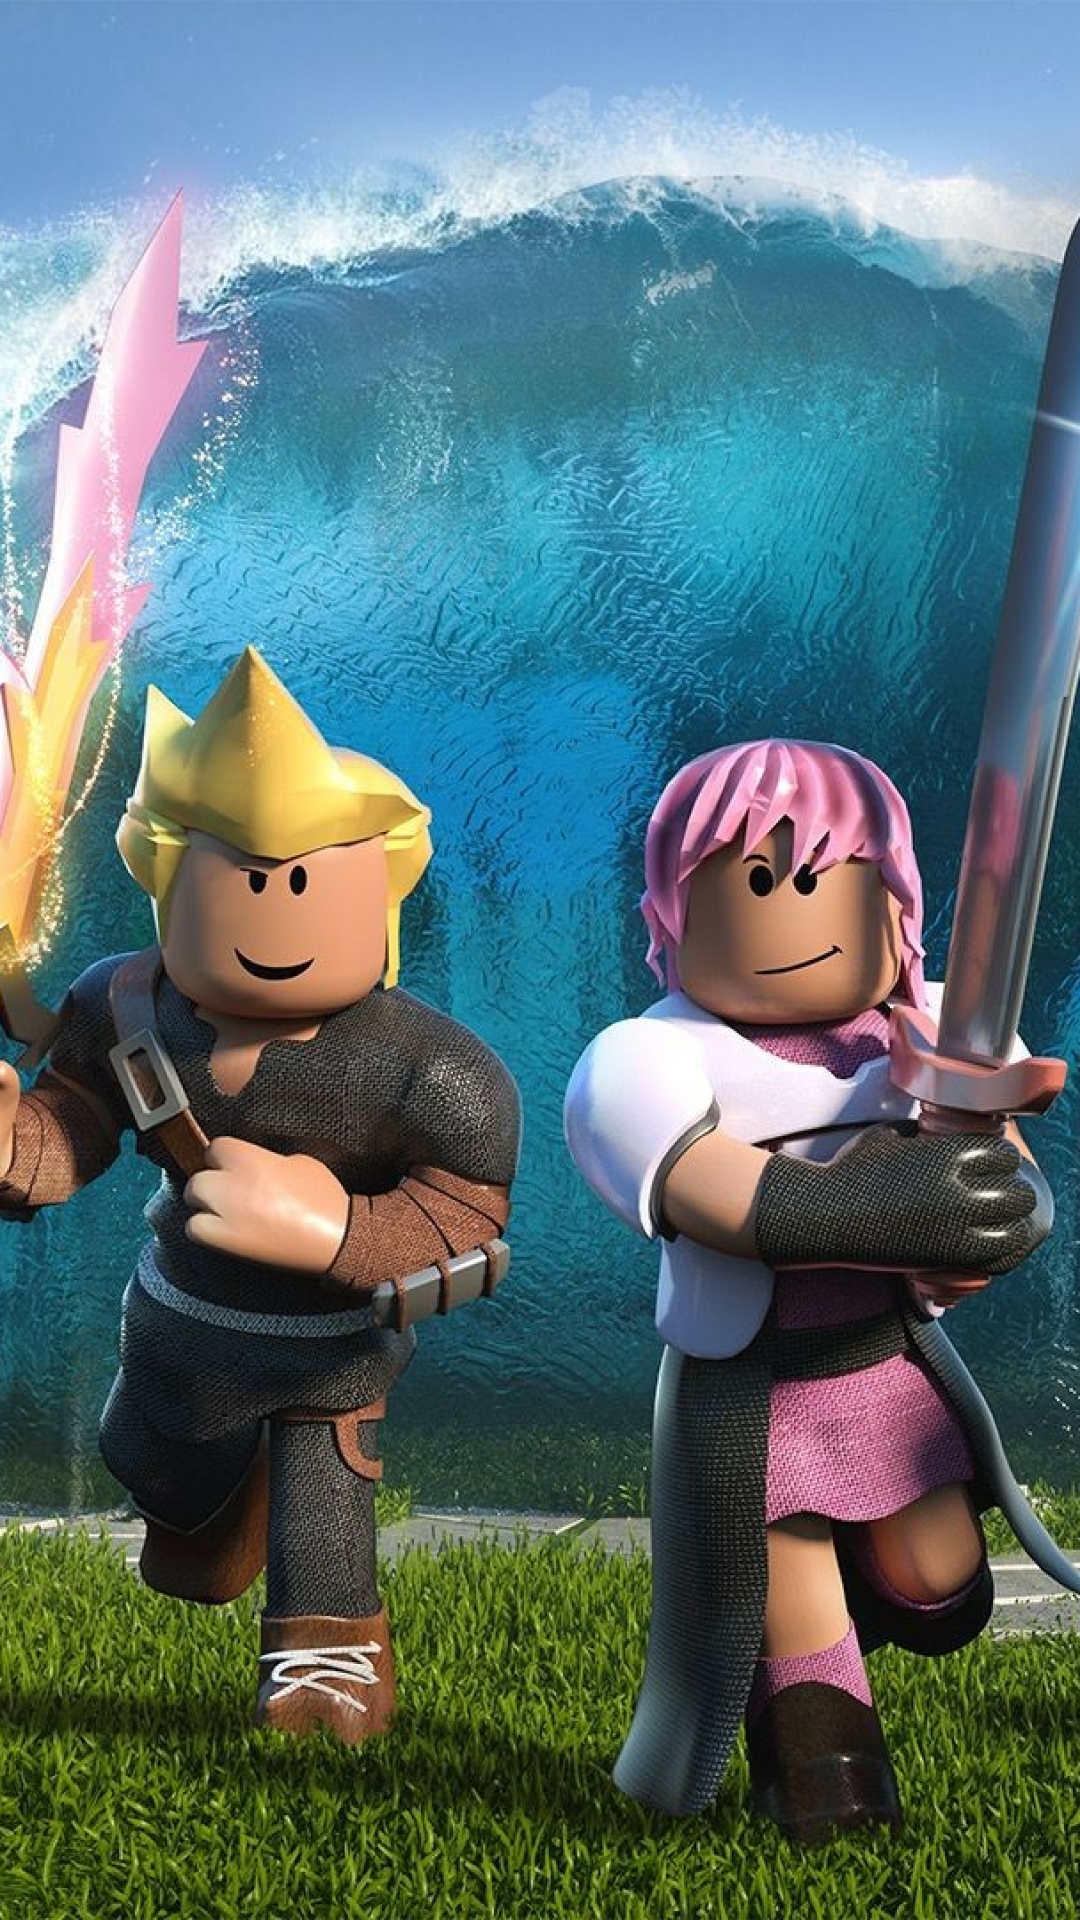 Roblox Adventure Duo Mobile Wallpaper - Mobile Abyss